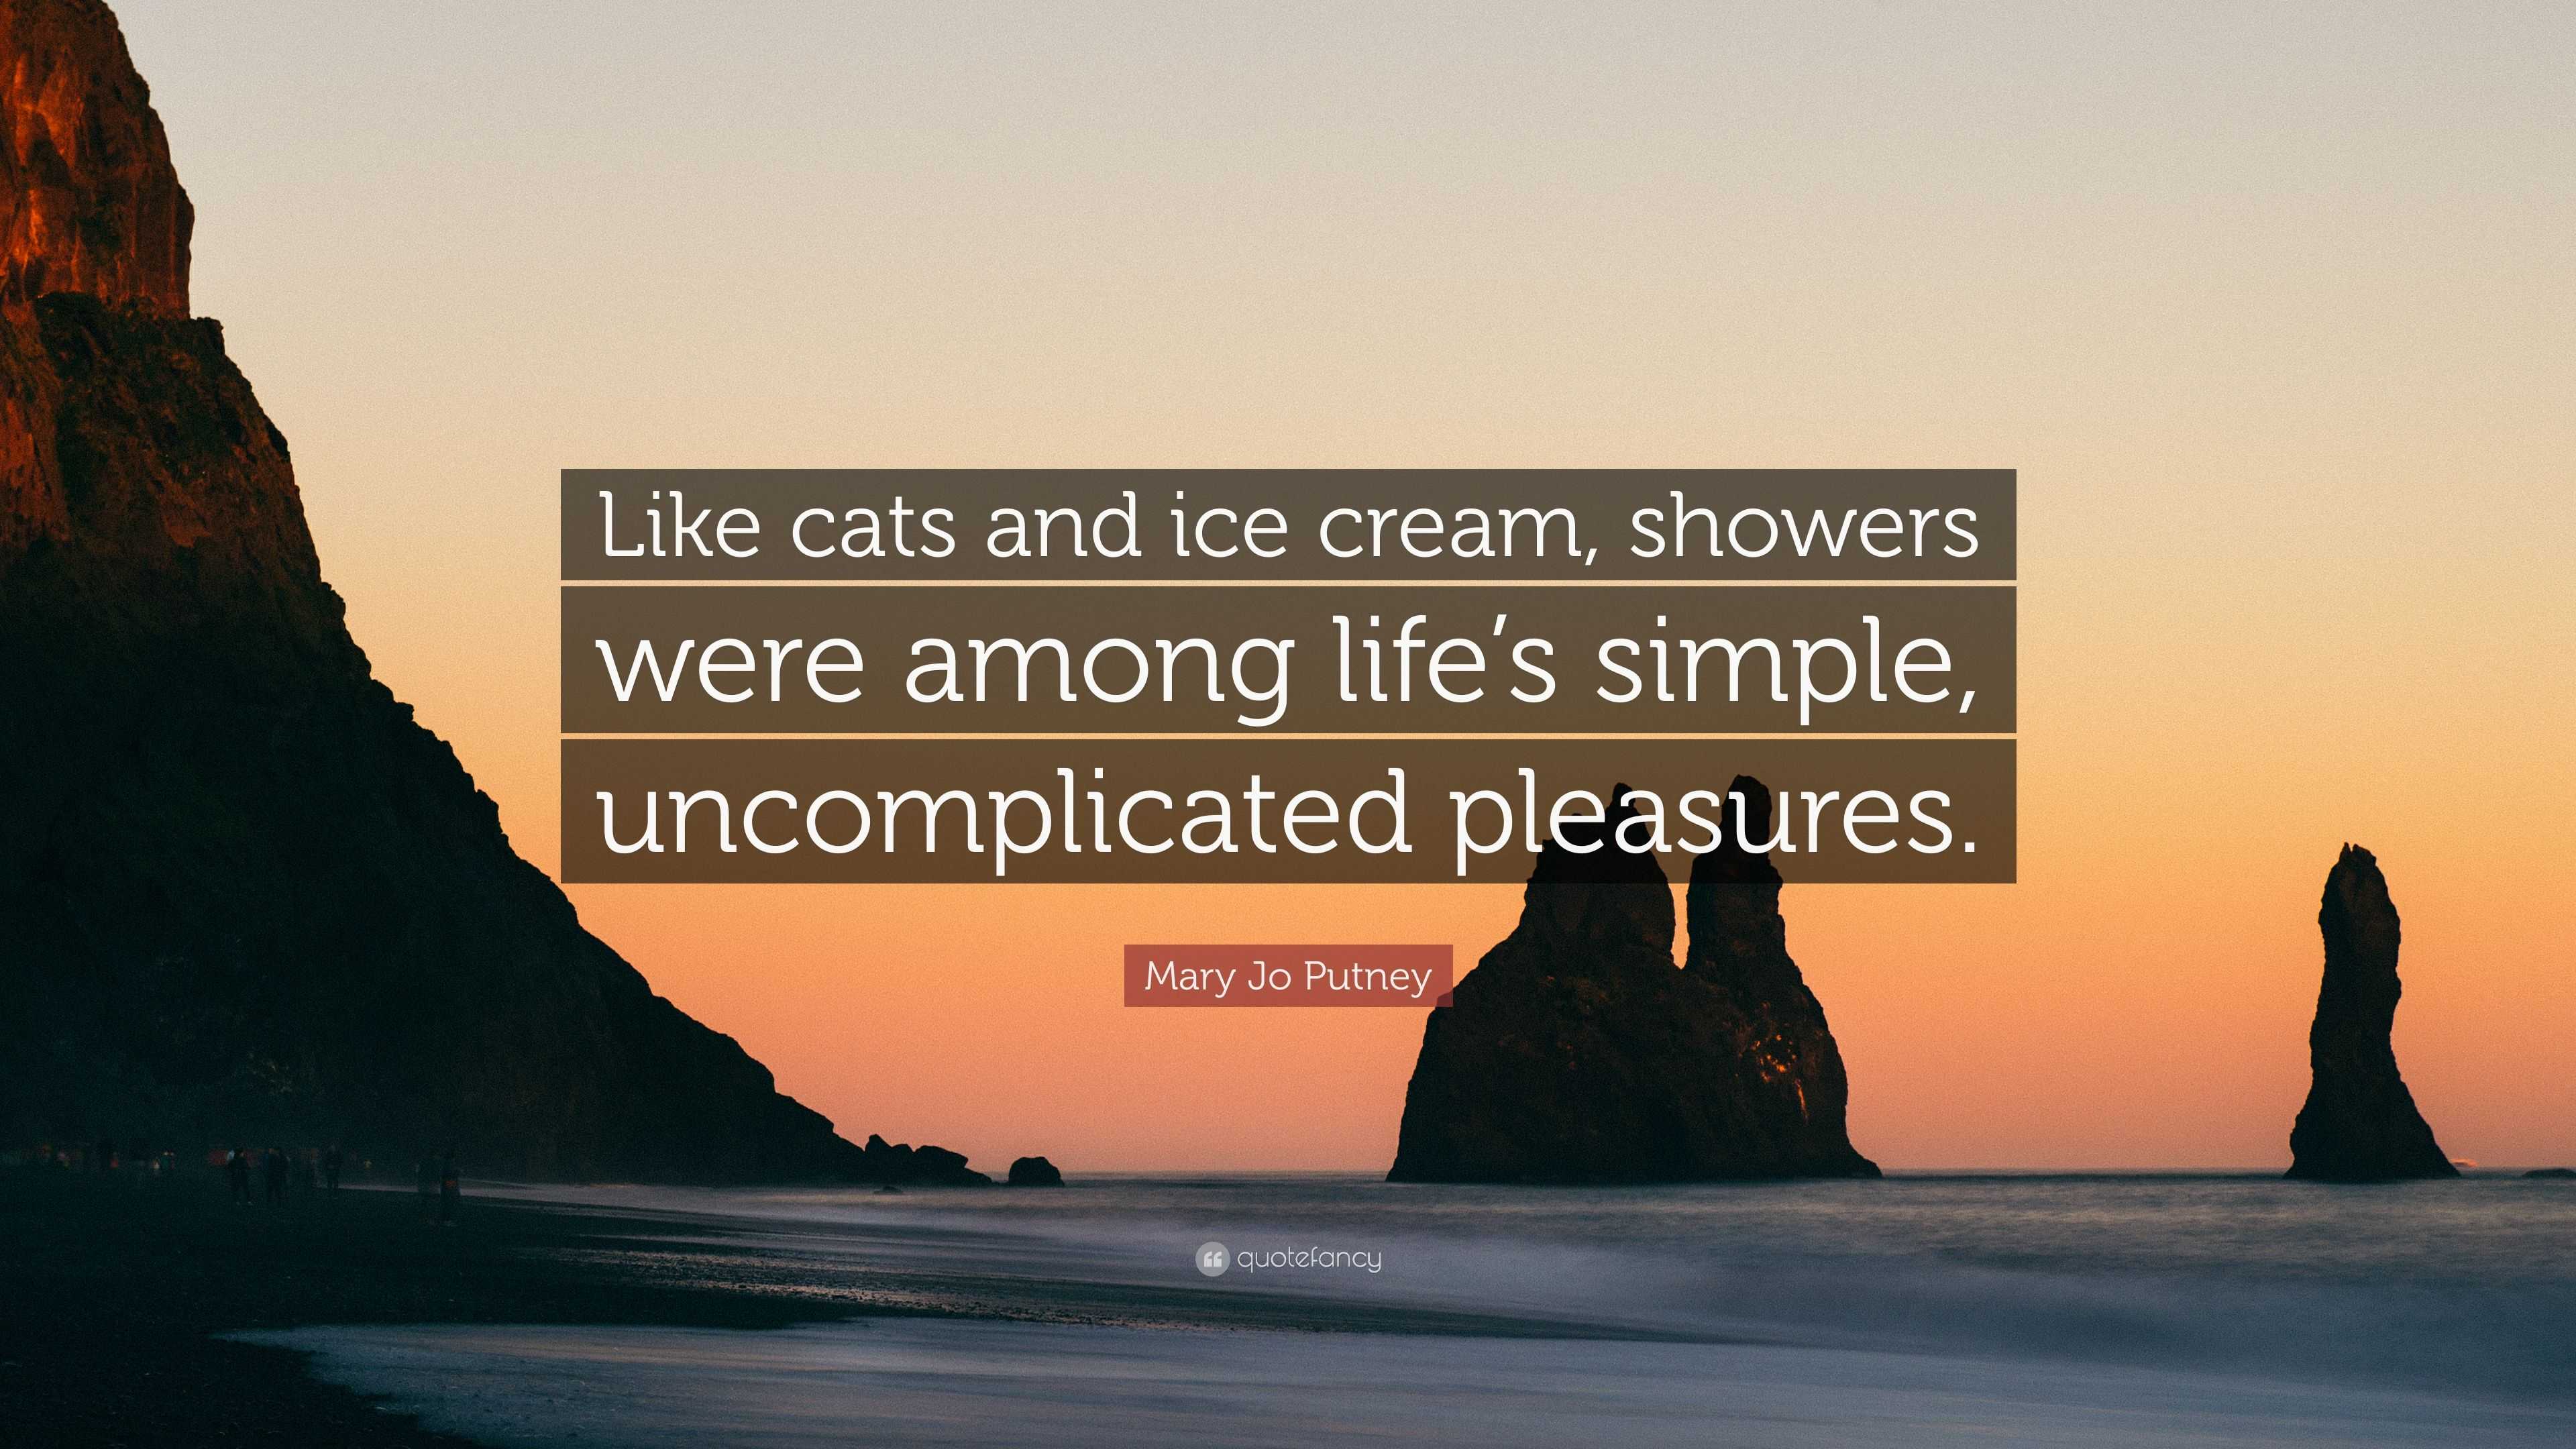 Mary Jo Putney Quote “Like cats and ice cream showers were among life s